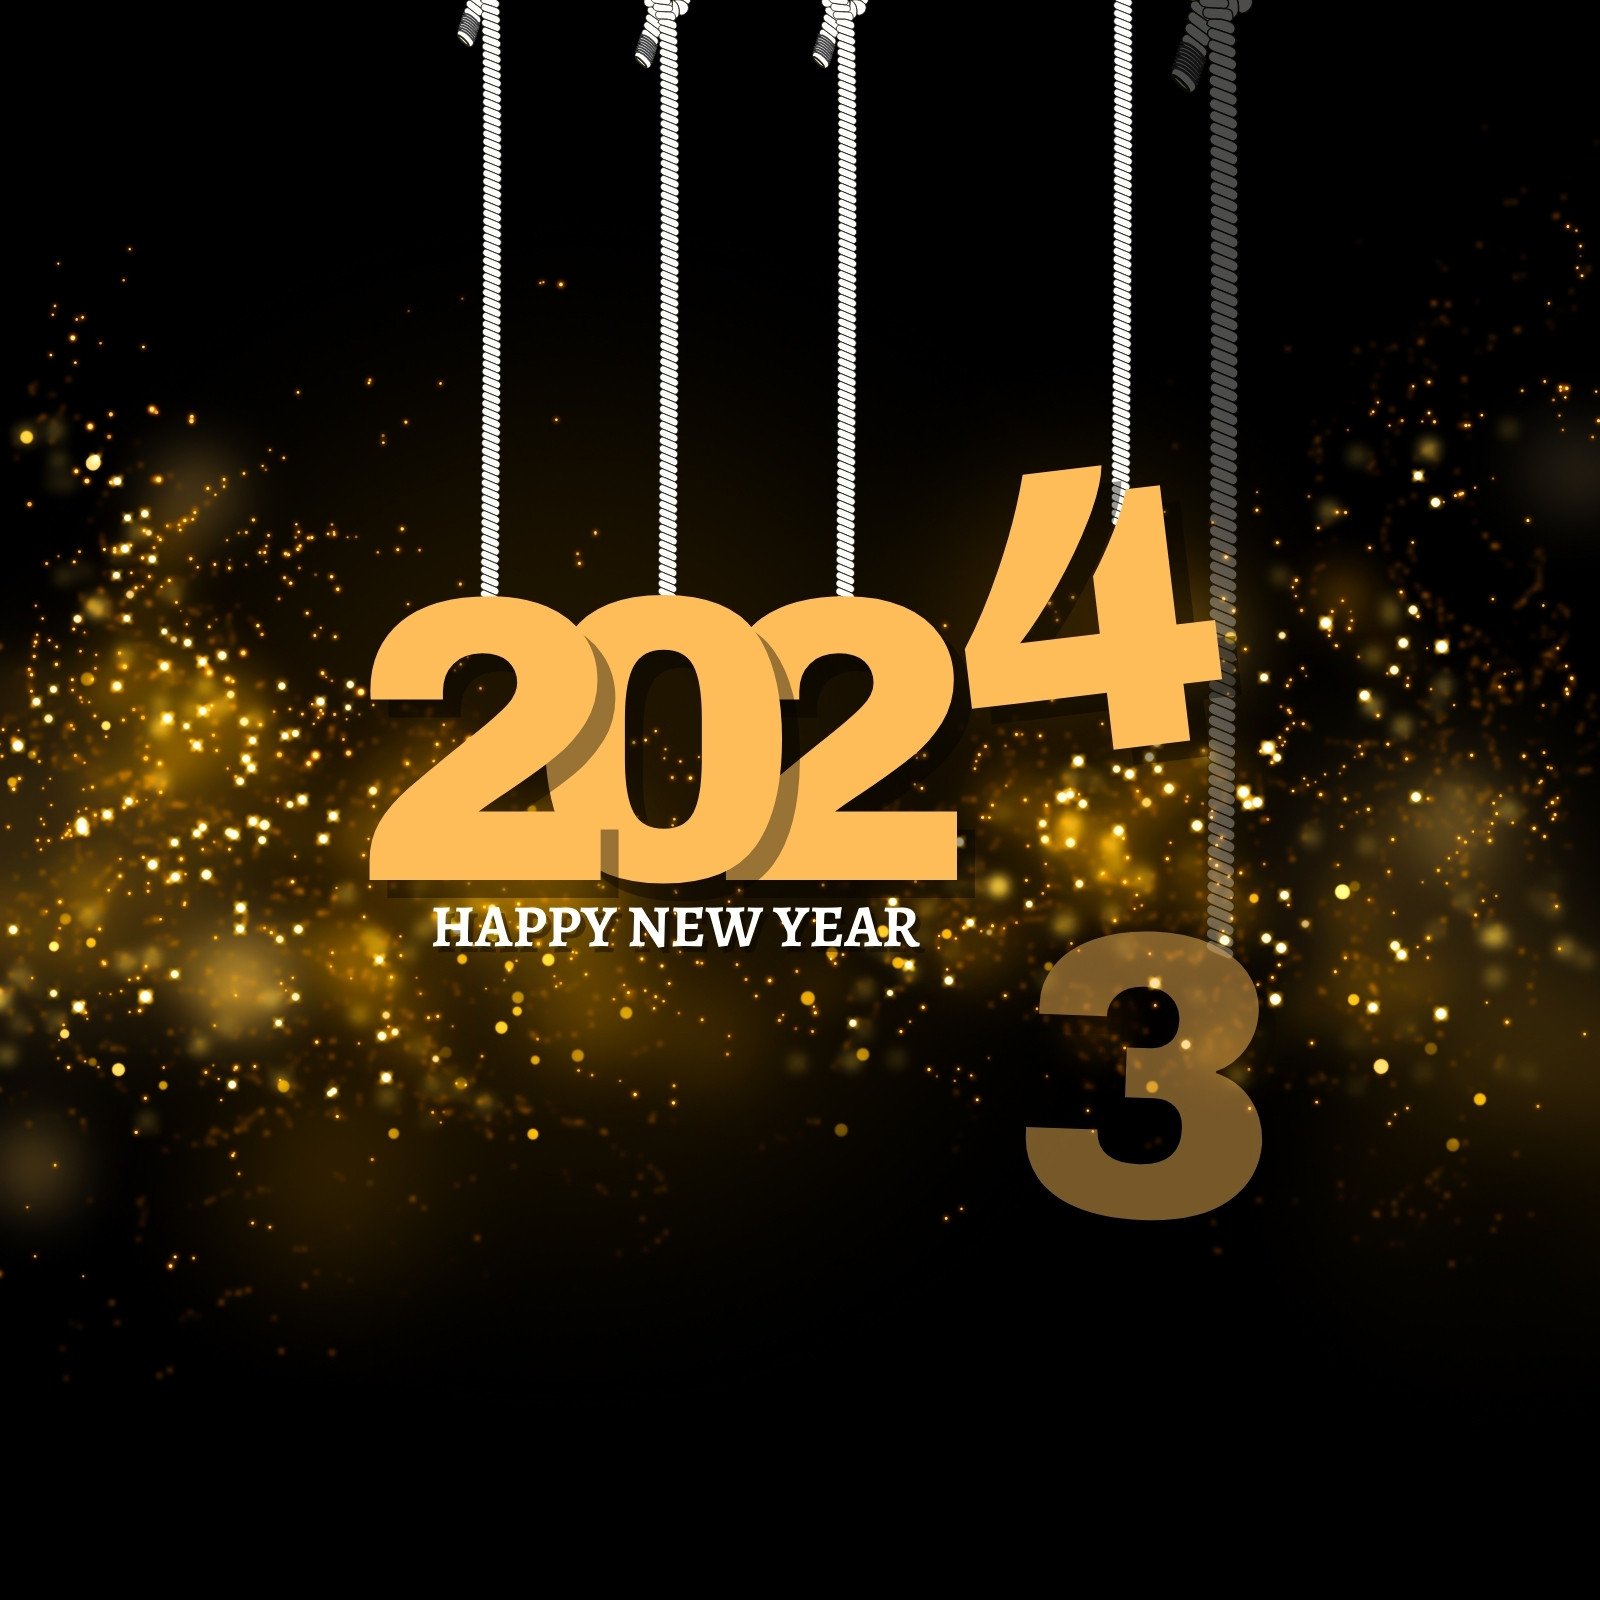 new years eve images free